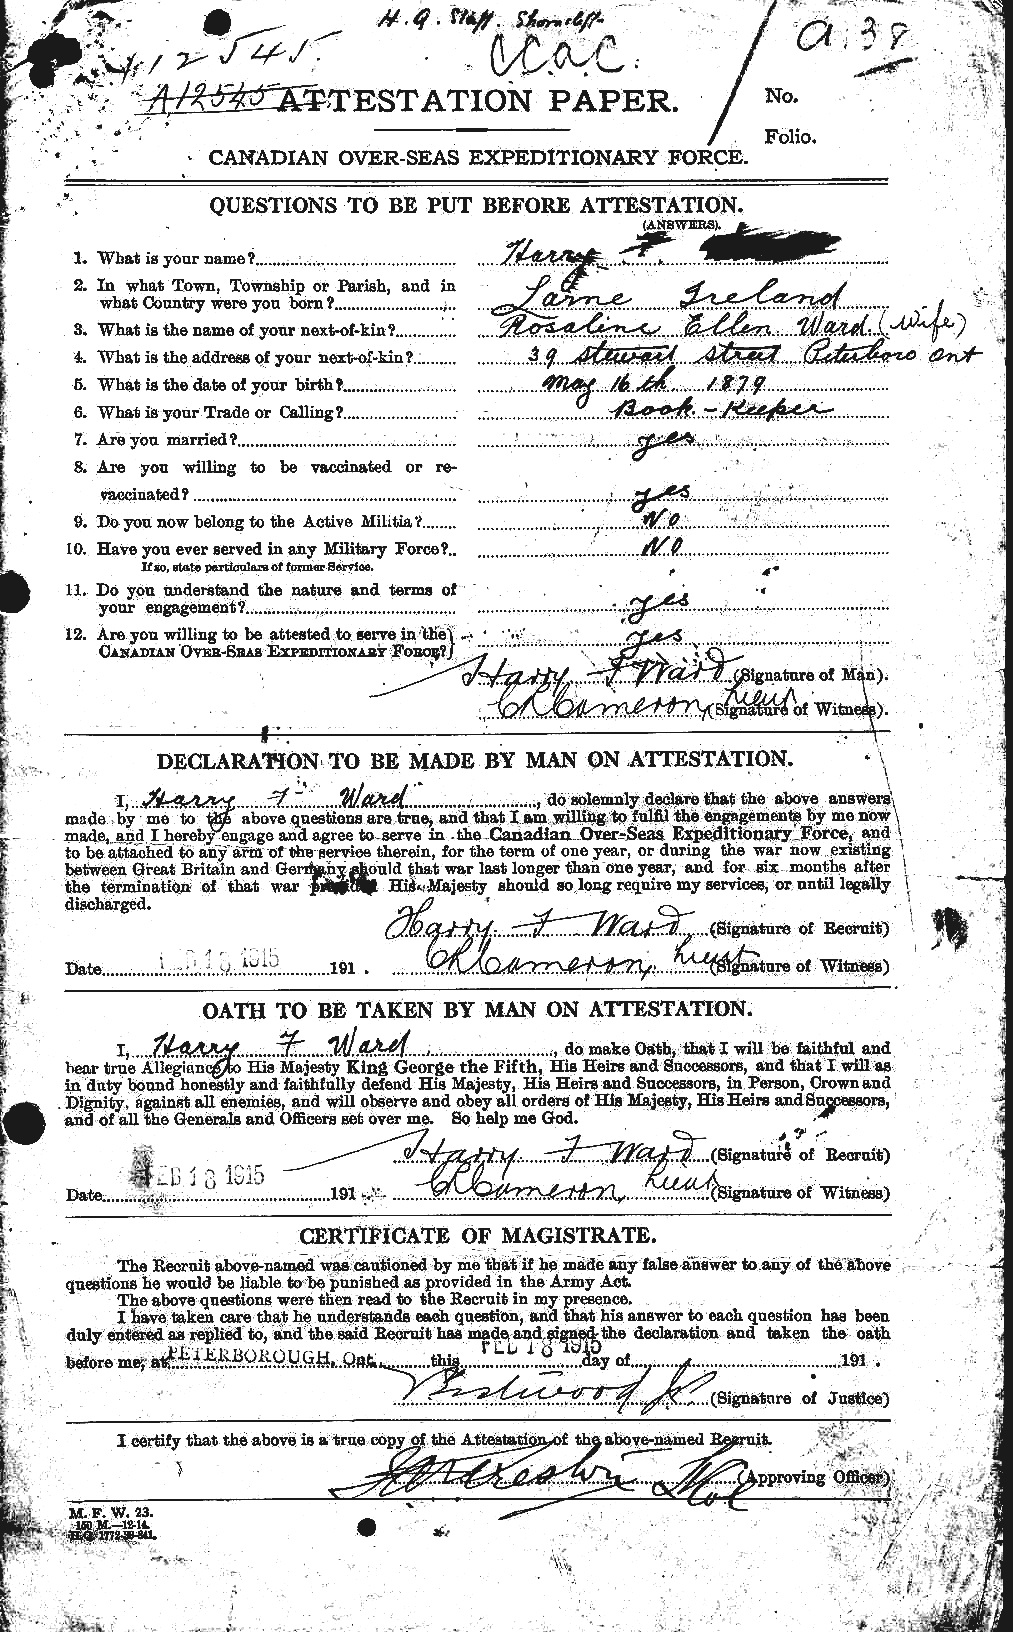 Personnel Records of the First World War - CEF 657813a